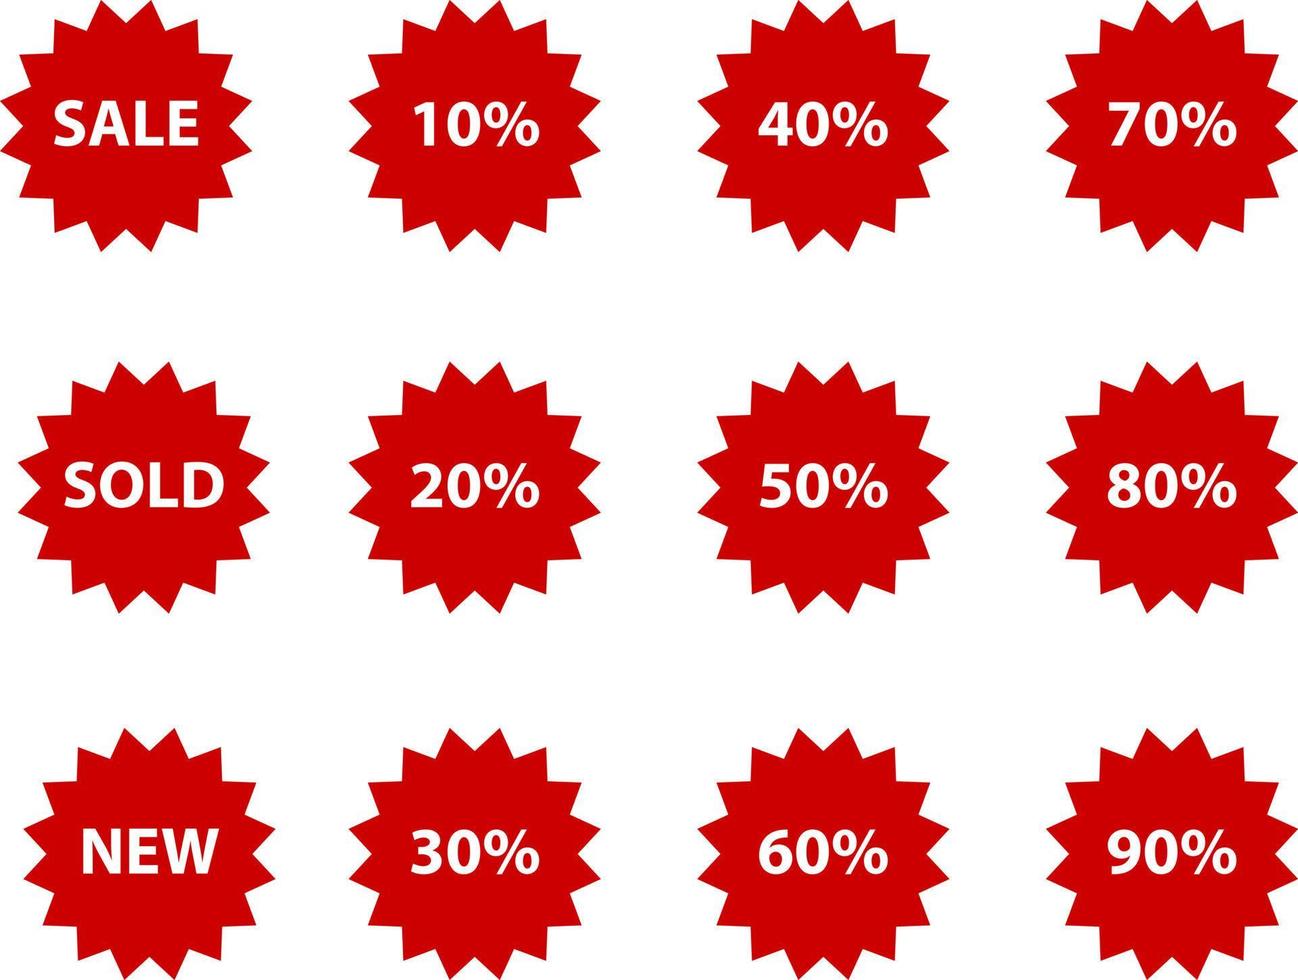 Sale badges, tags vector. Set of red color icons Sale, Sold, New, Percentage discounts. vector